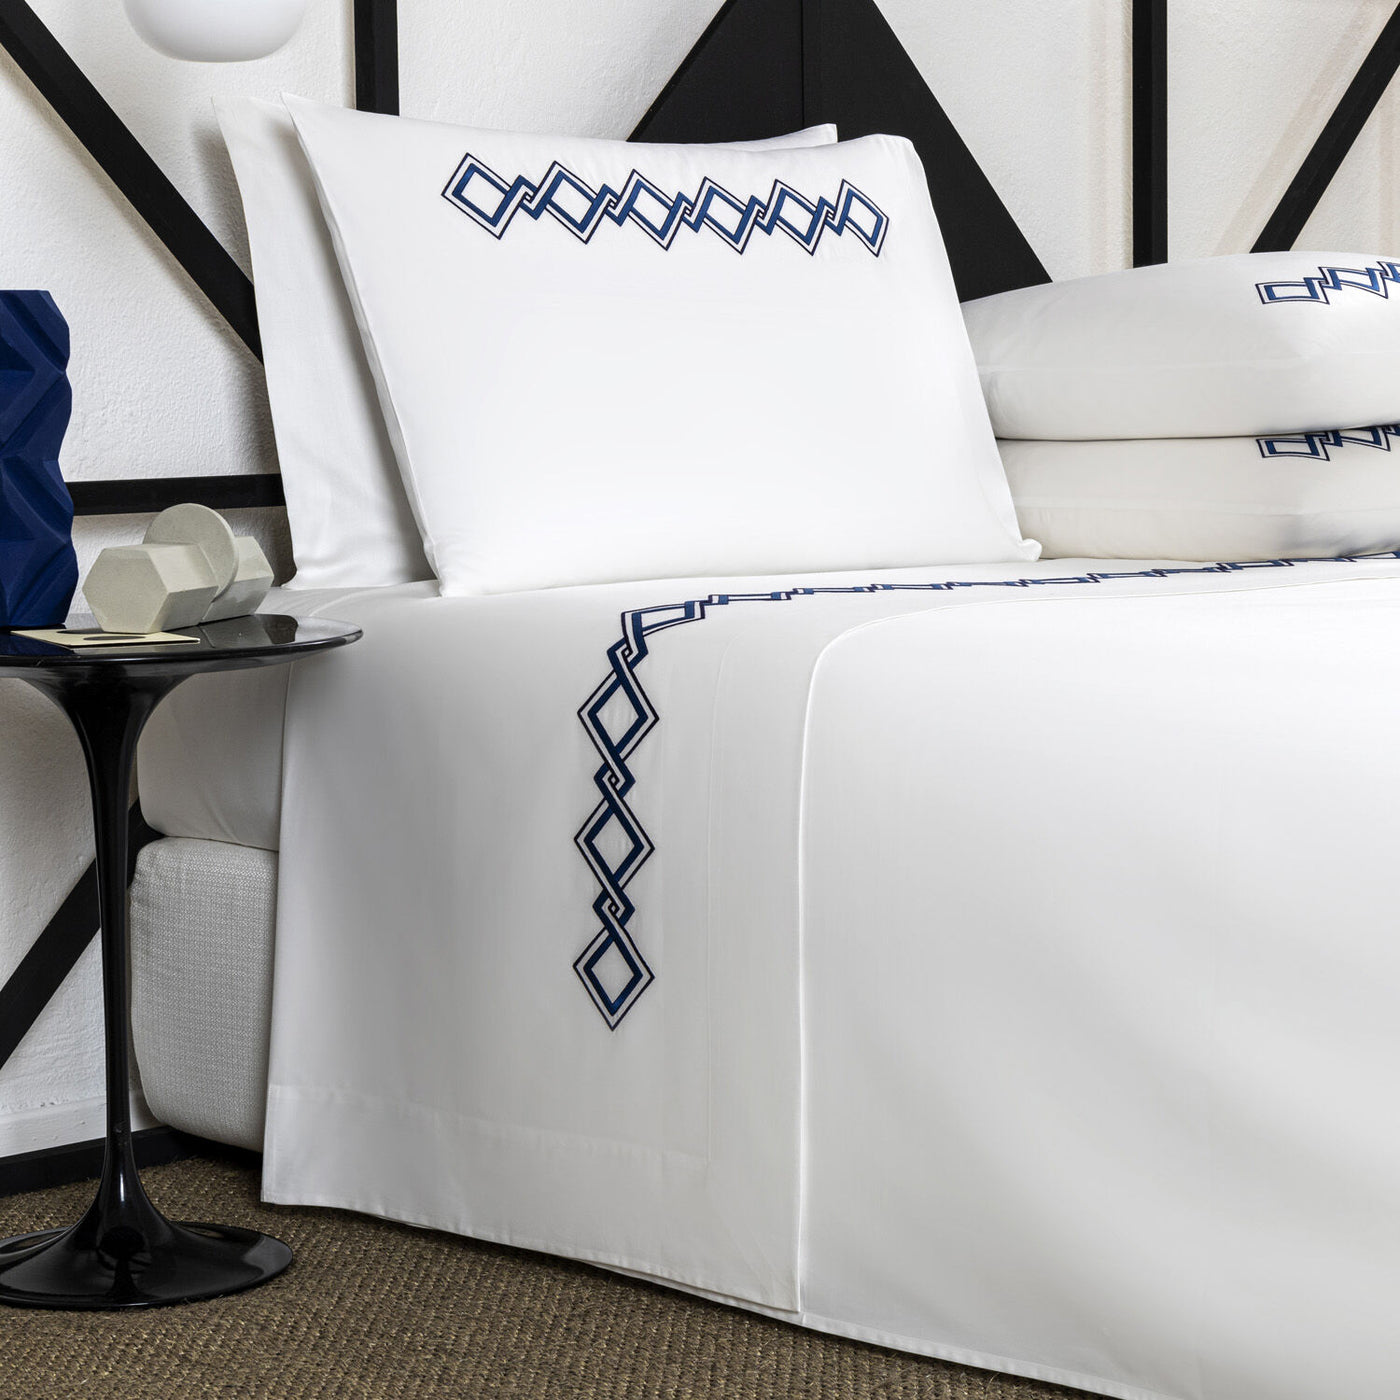 TWIST EMBROIDERY DUVET COVER